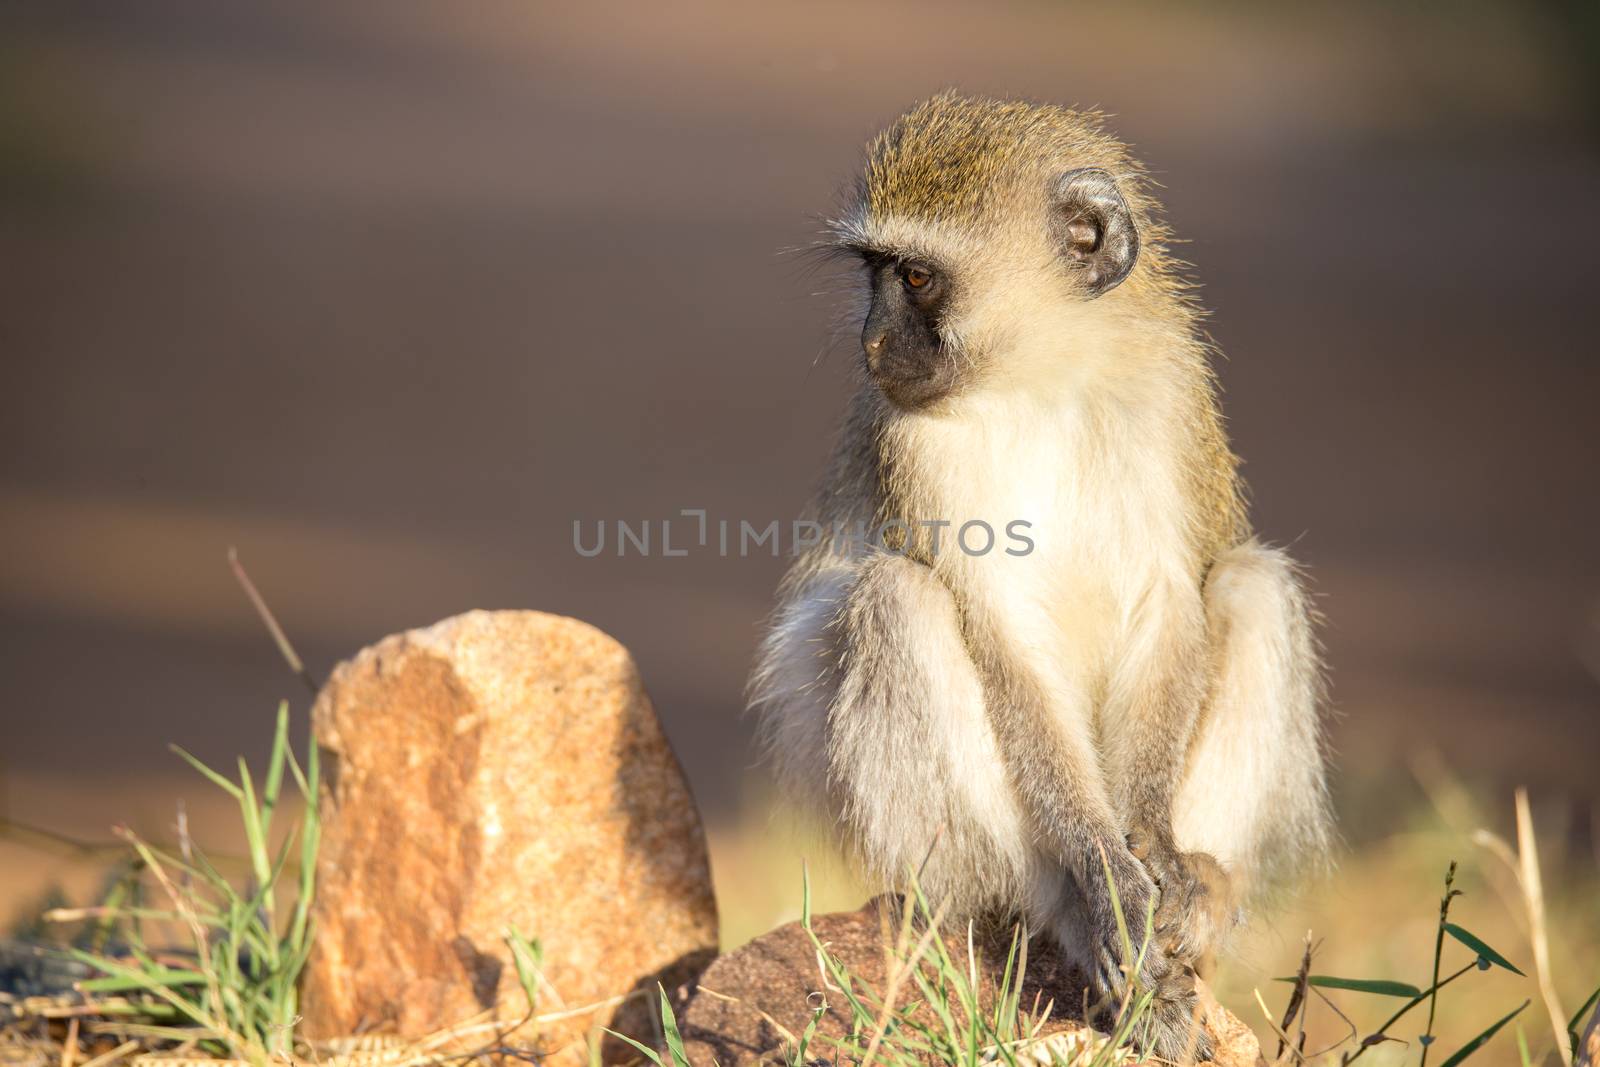 A monkey sits and looks around by 25ehaag6